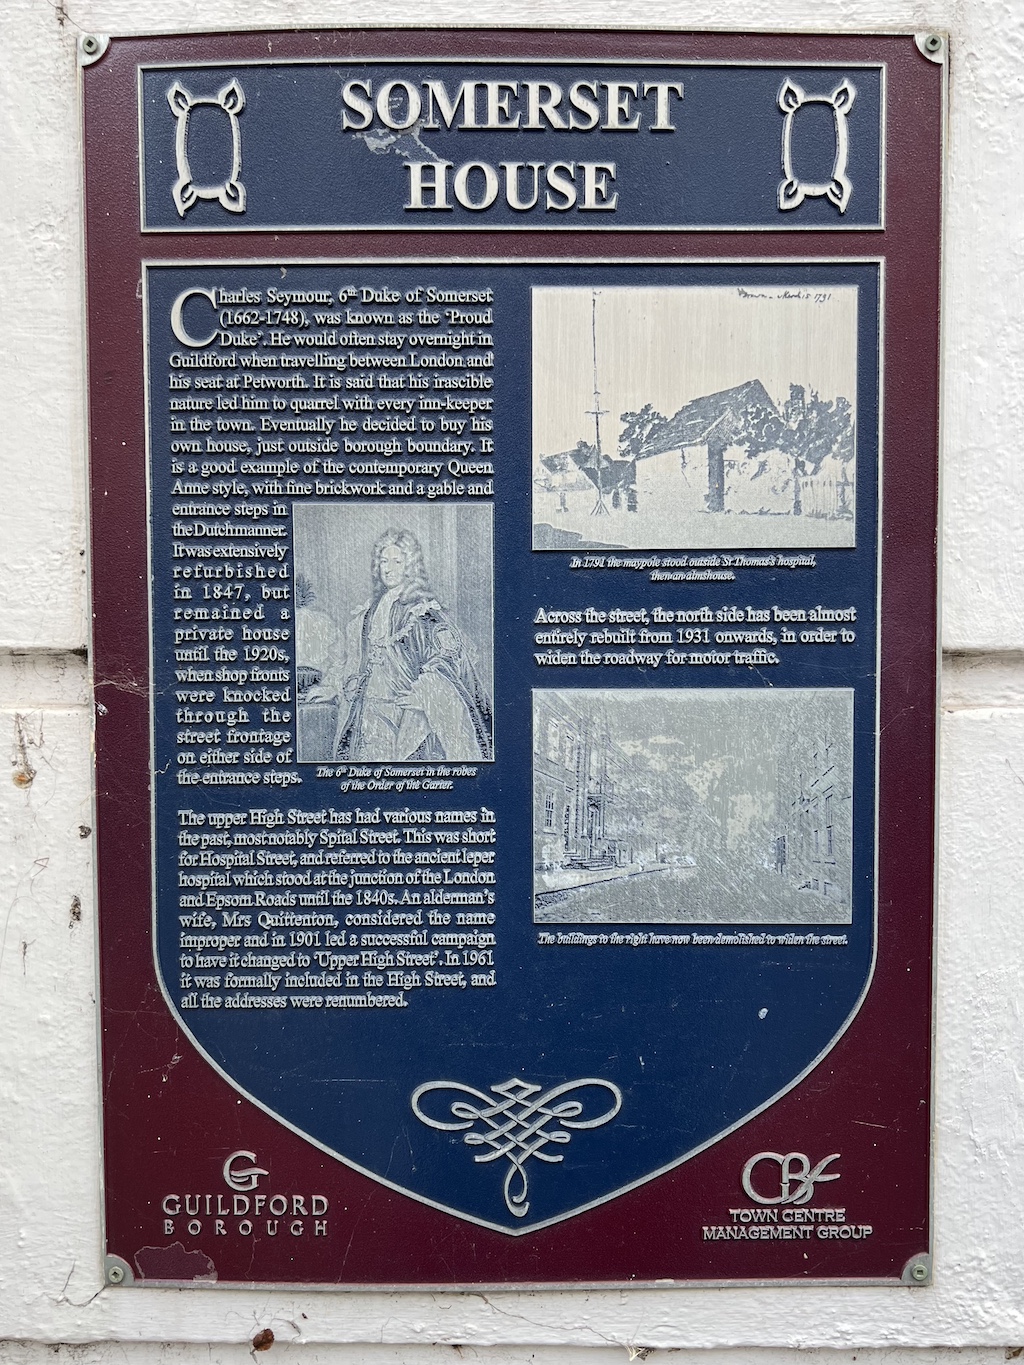 Blue plaque in Guildford for Somerset House